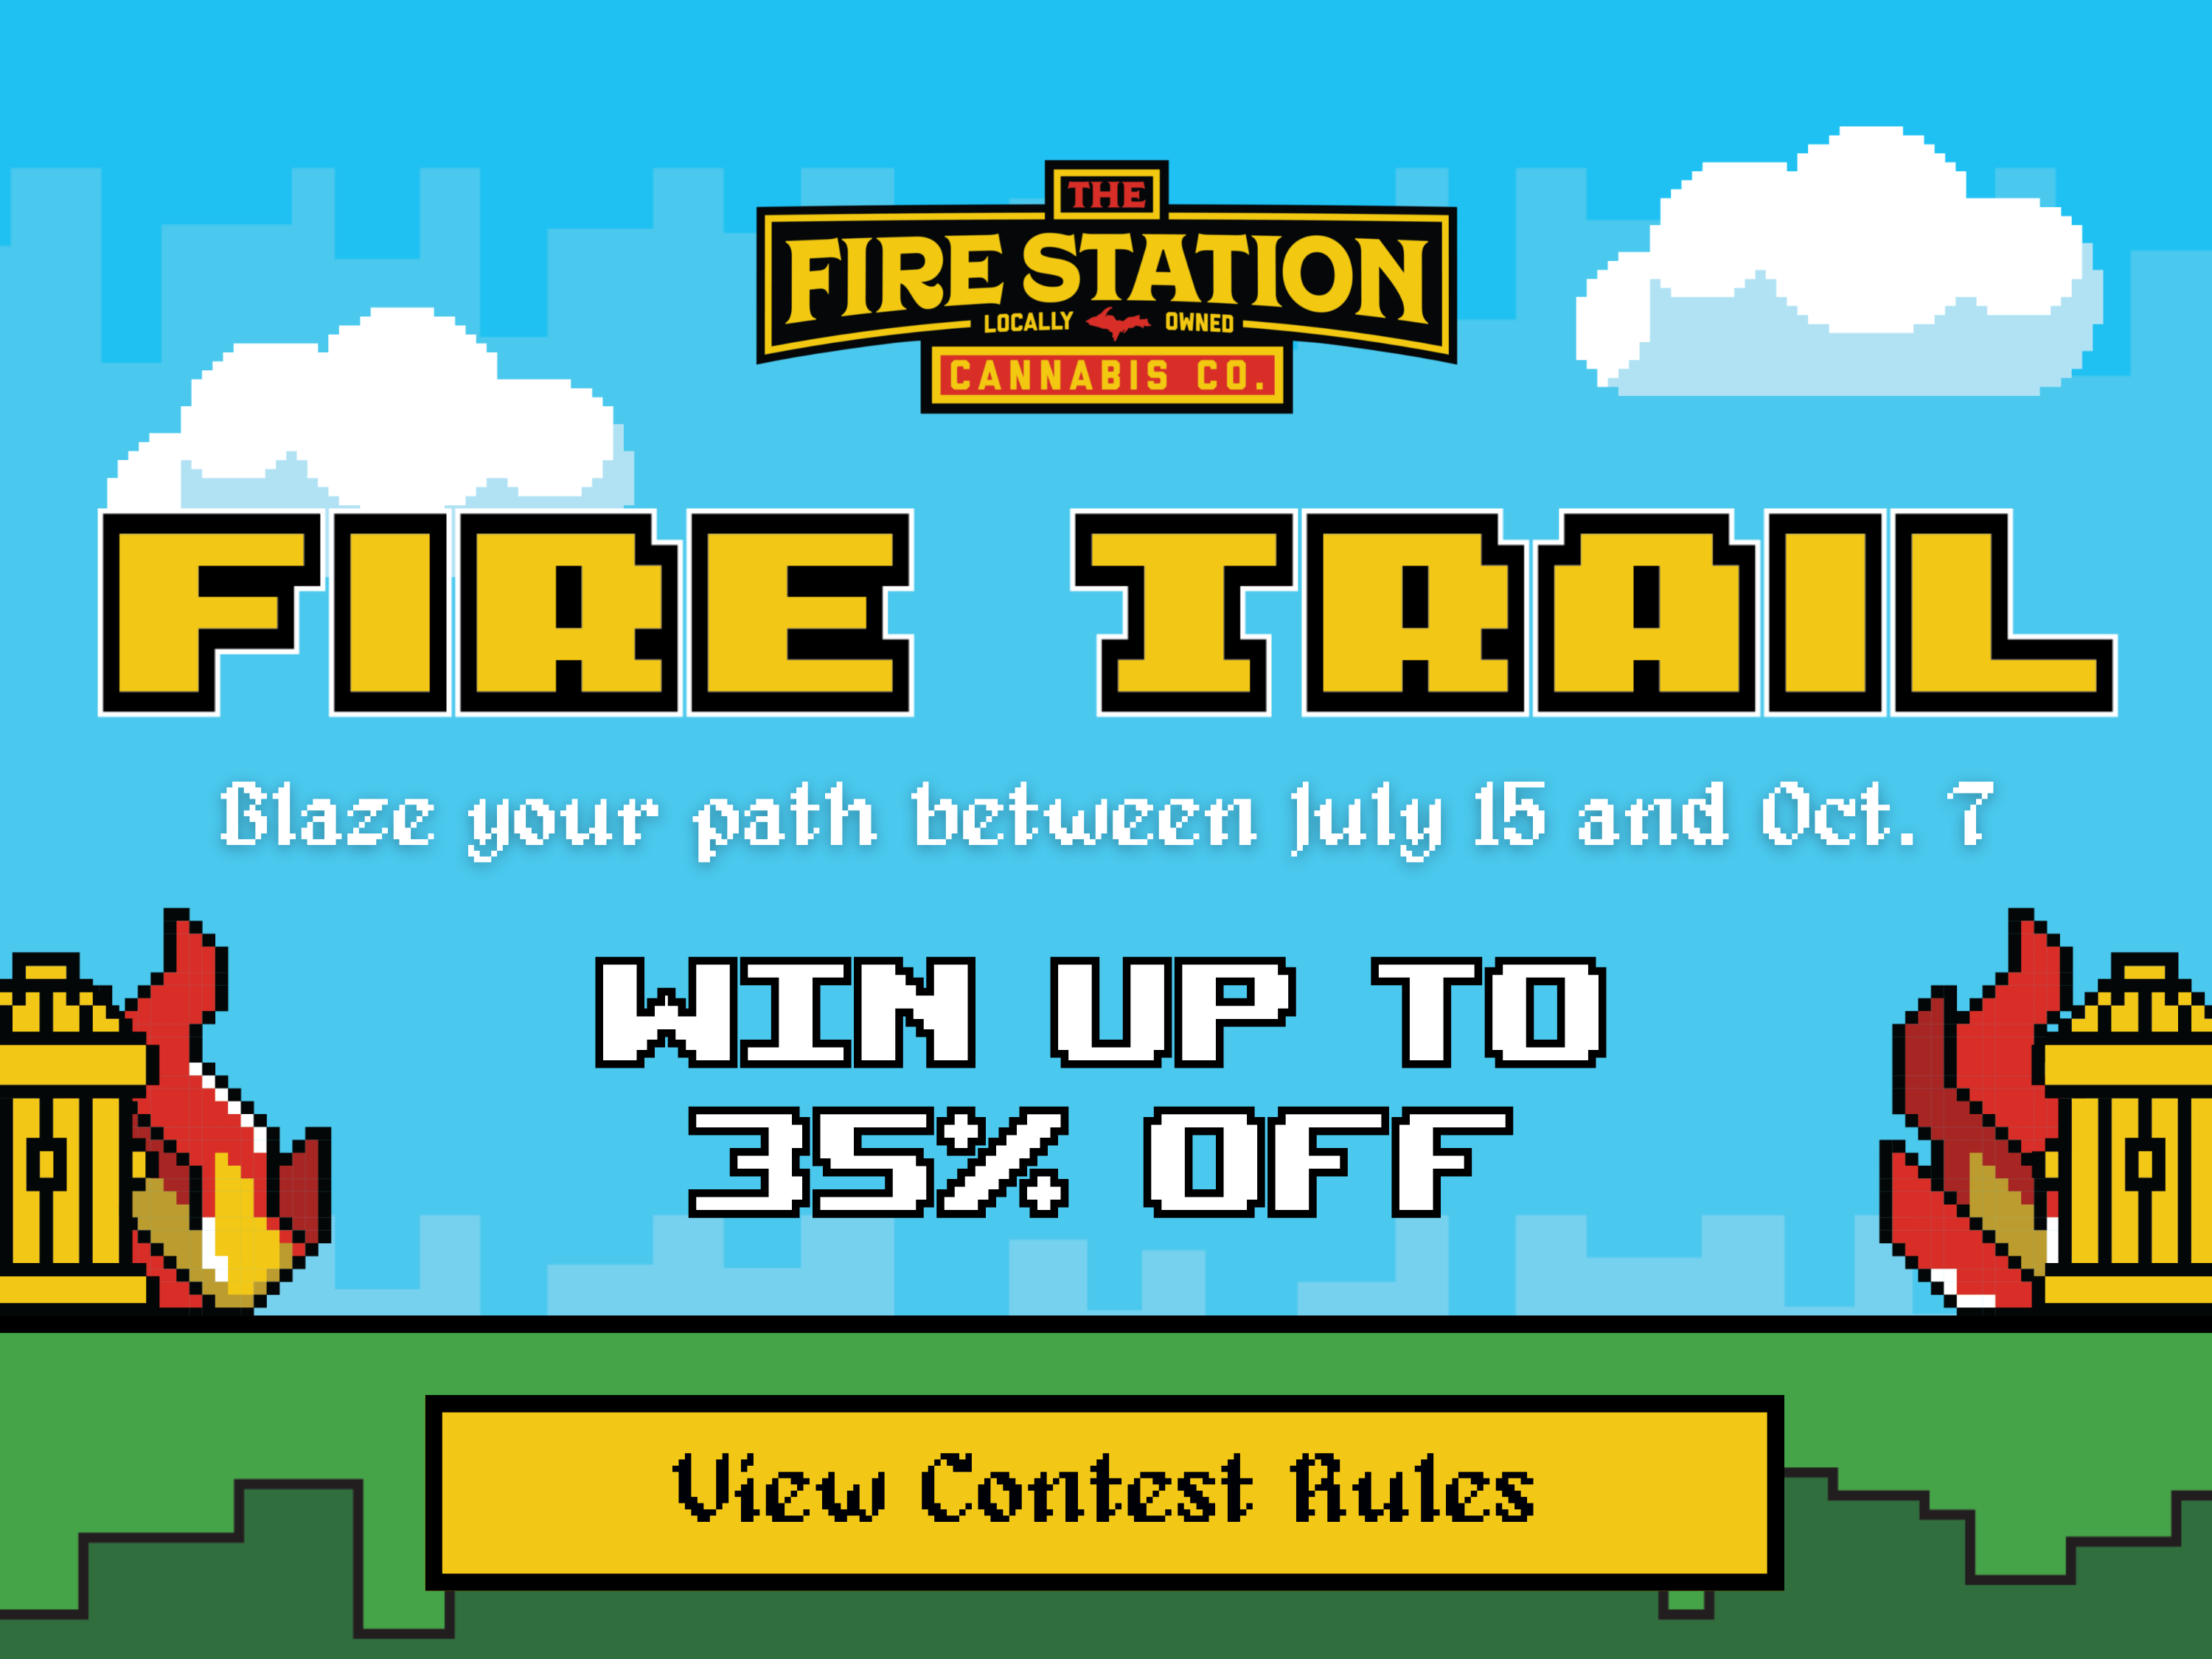 The Fire Trail - Win up to 35% off!